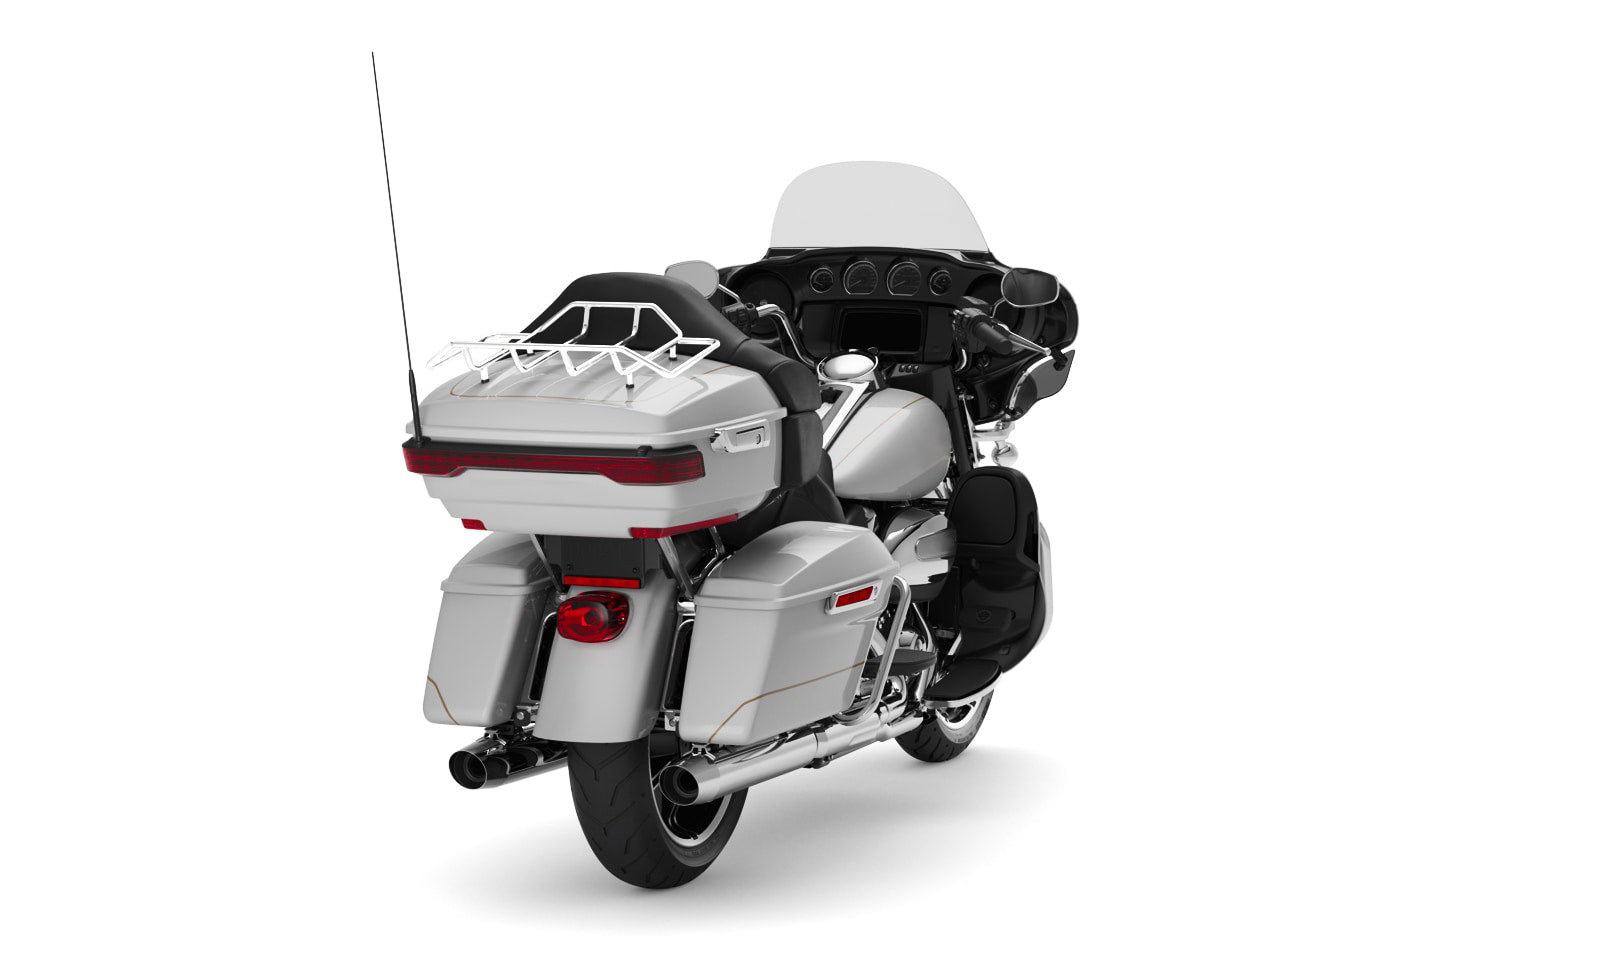 Viking Voyage Tour Pack Luggage Rack for Harley Street Glide Chrome Bag on Bike View @expand